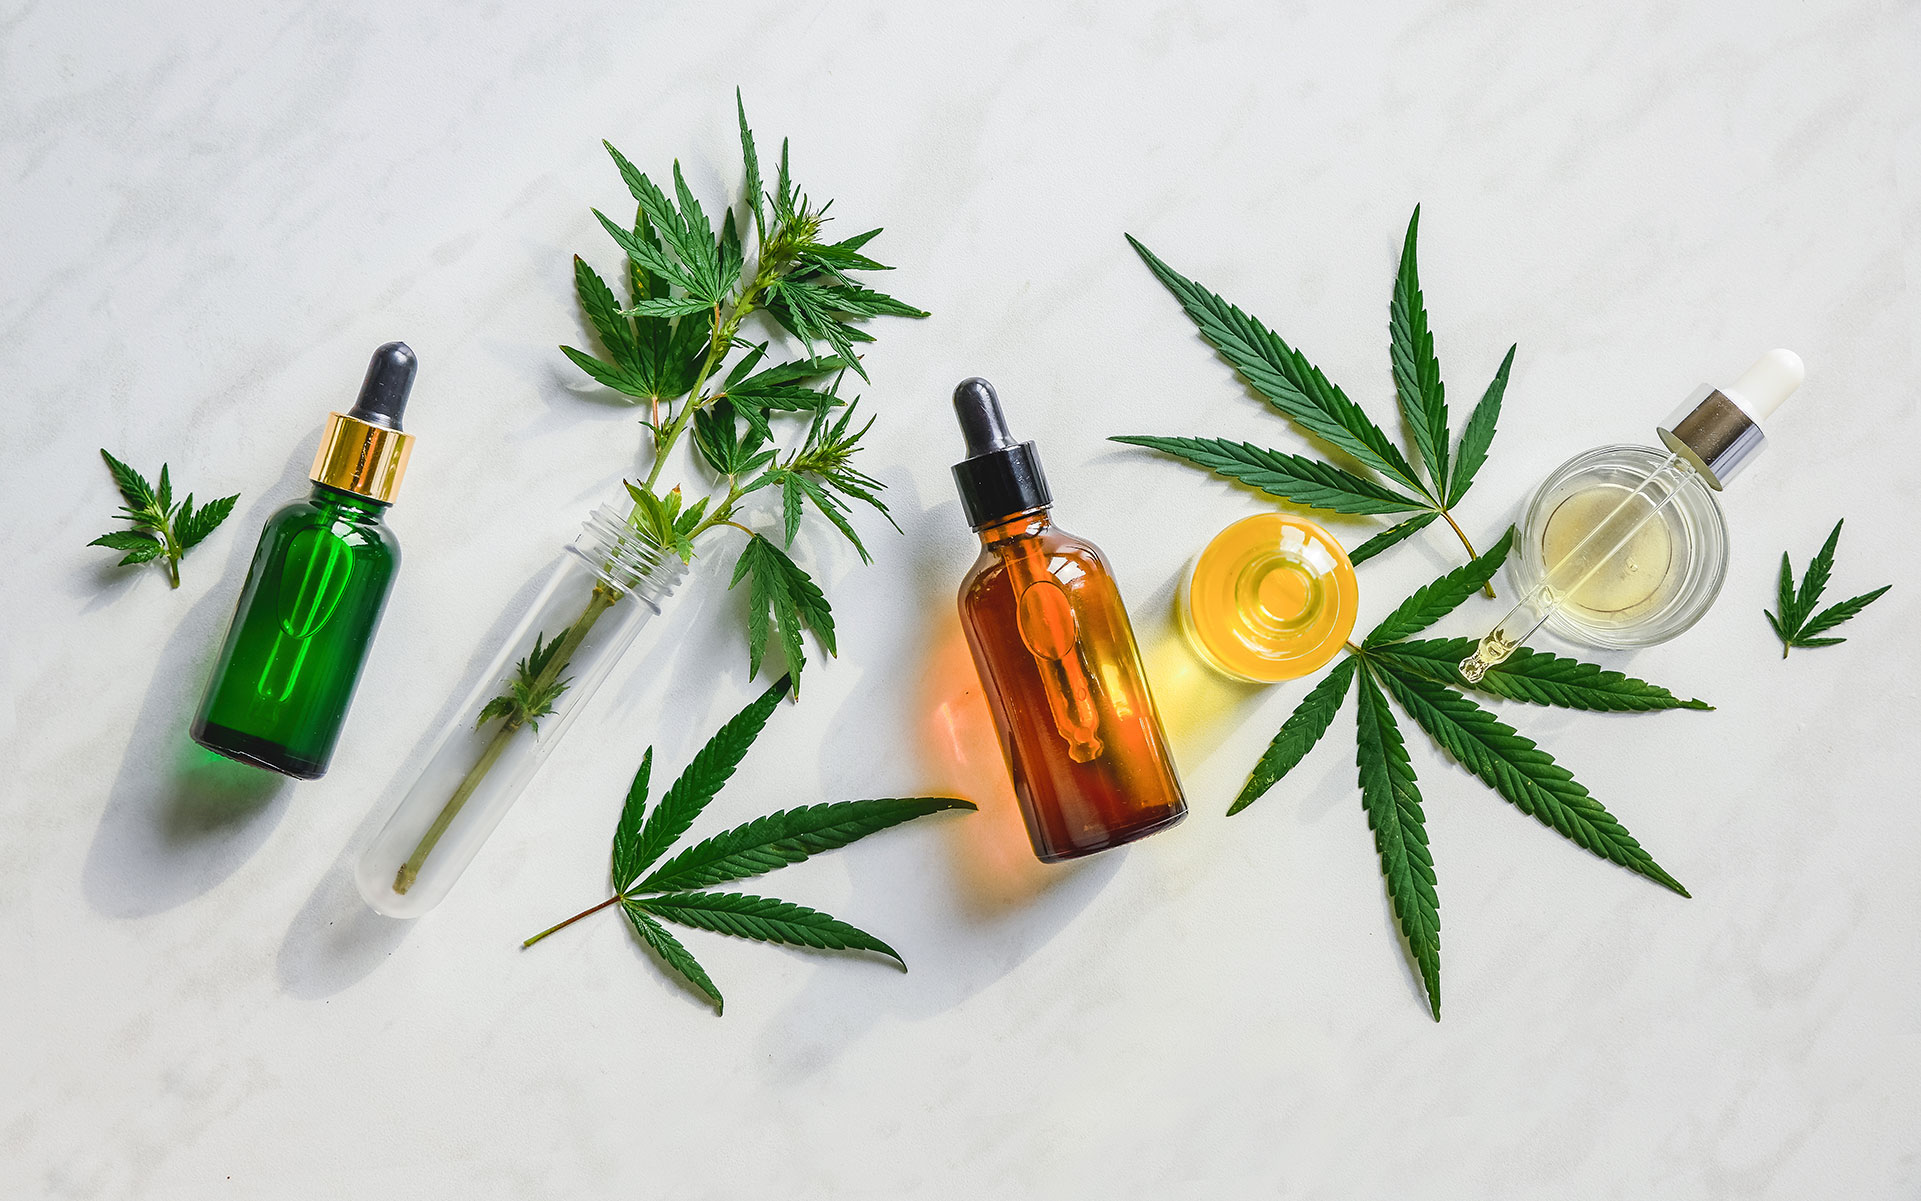 Where To Buy Cw Cbd Oil - Cbd|Oil|Cannabidiol|Products|View|Abstract|Effects|Hemp|Cannabis|Product|Thc|Pain|People|Health|Body|Plant|Cannabinoids|Medications|Oils|Drug|Benefits|System|Study|Marijuana|Anxiety|Side|Research|Effect|Liver|Quality|Treatment|Studies|Epilepsy|Symptoms|Gummies|Compounds|Dose|Time|Inflammation|Bottle|Cbd Oil|View Abstract|Side Effects|Cbd Products|Endocannabinoid System|Multiple Sclerosis|Cbd Oils|Cbd Gummies|Cannabis Plant|Hemp Oil|Cbd Product|Hemp Plant|United States|Cytochrome P450|Many People|Chronic Pain|Nuleaf Naturals|Royal Cbd|Full-Spectrum Cbd Oil|Drug Administration|Cbd Oil Products|Medical Marijuana|Drug Test|Heavy Metals|Clinical Trial|Clinical Trials|Cbd Oil Side|Rating Highlights|Wide Variety|Animal Studies